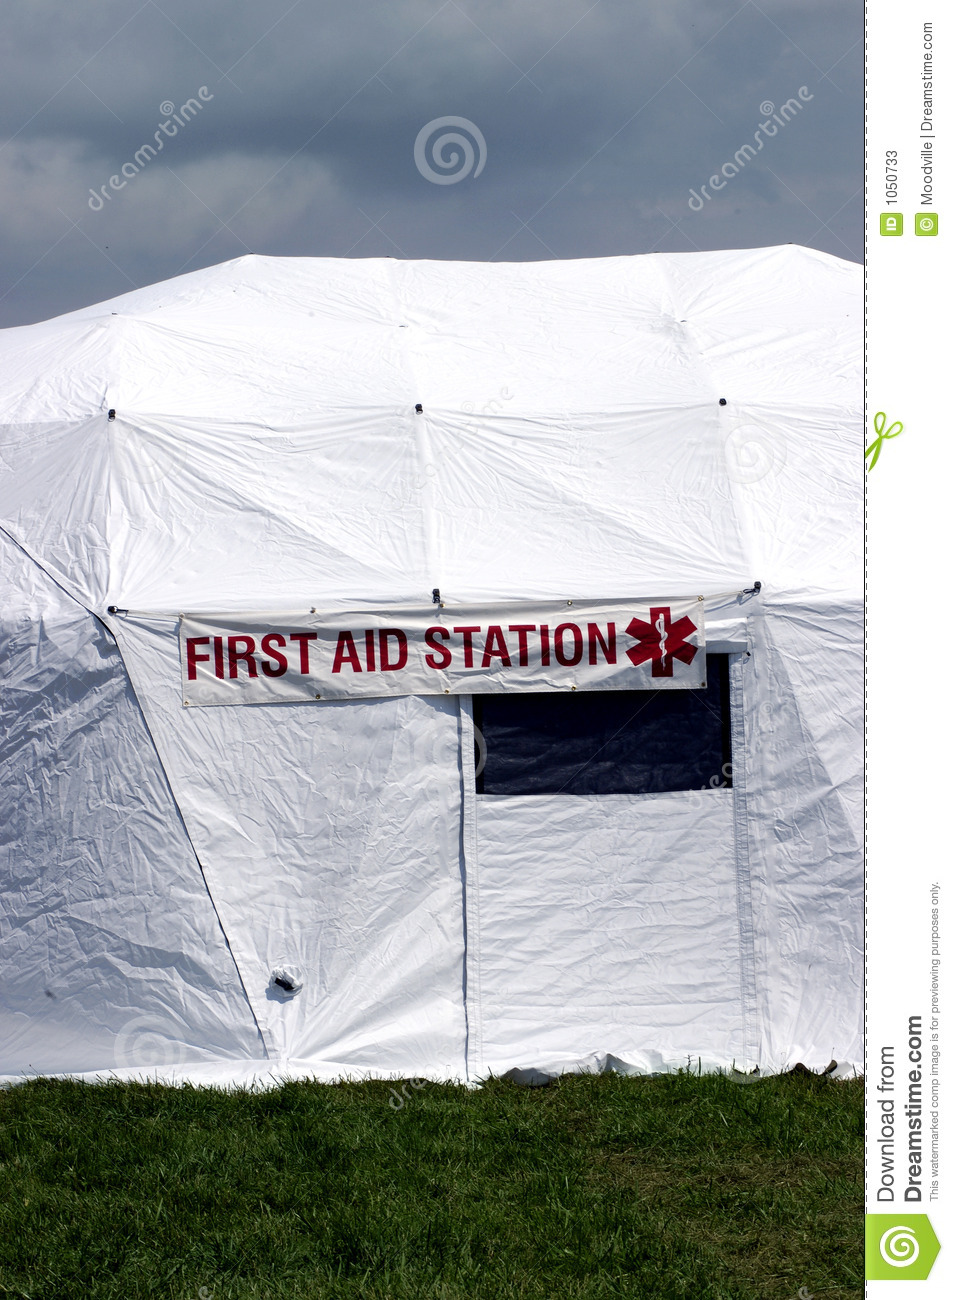 First Aid Station Stock Photos   Image  1050733